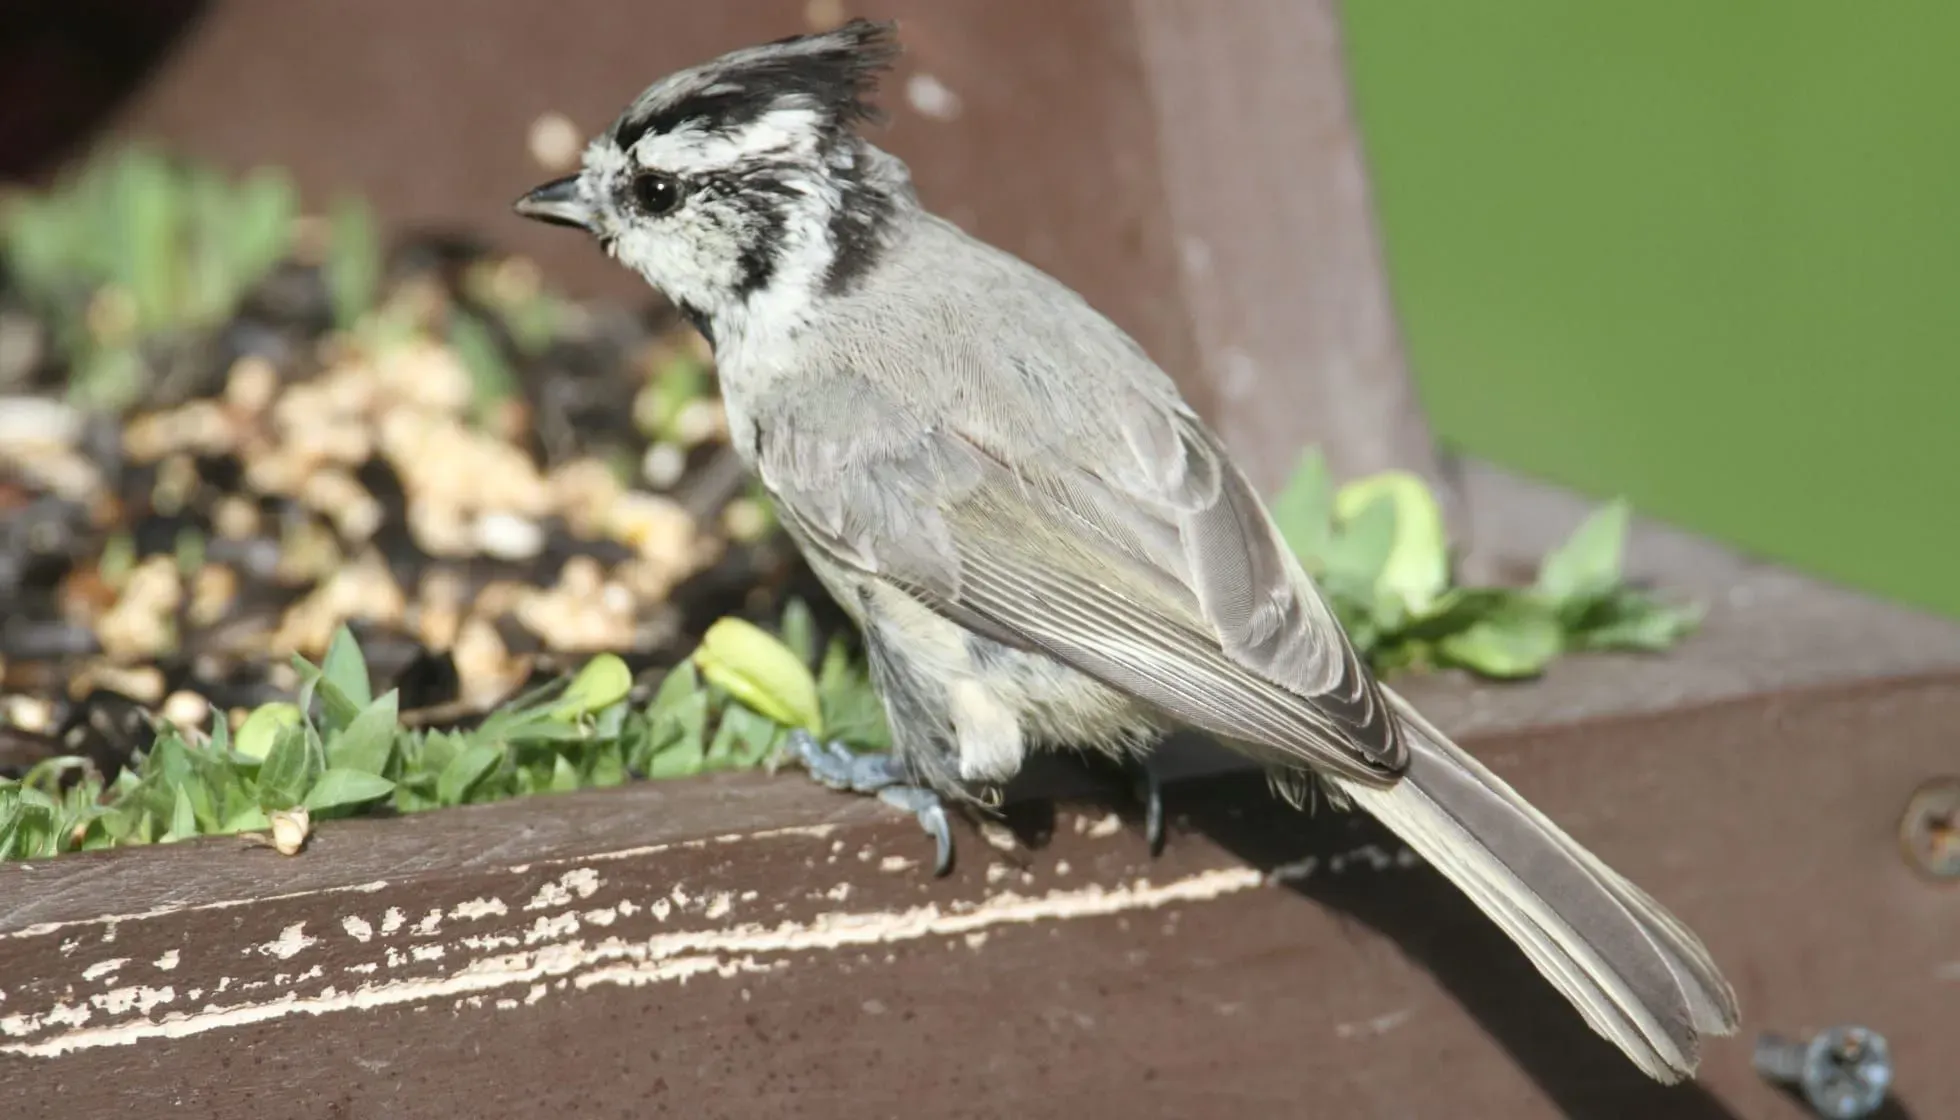 The Bridled Titmouse